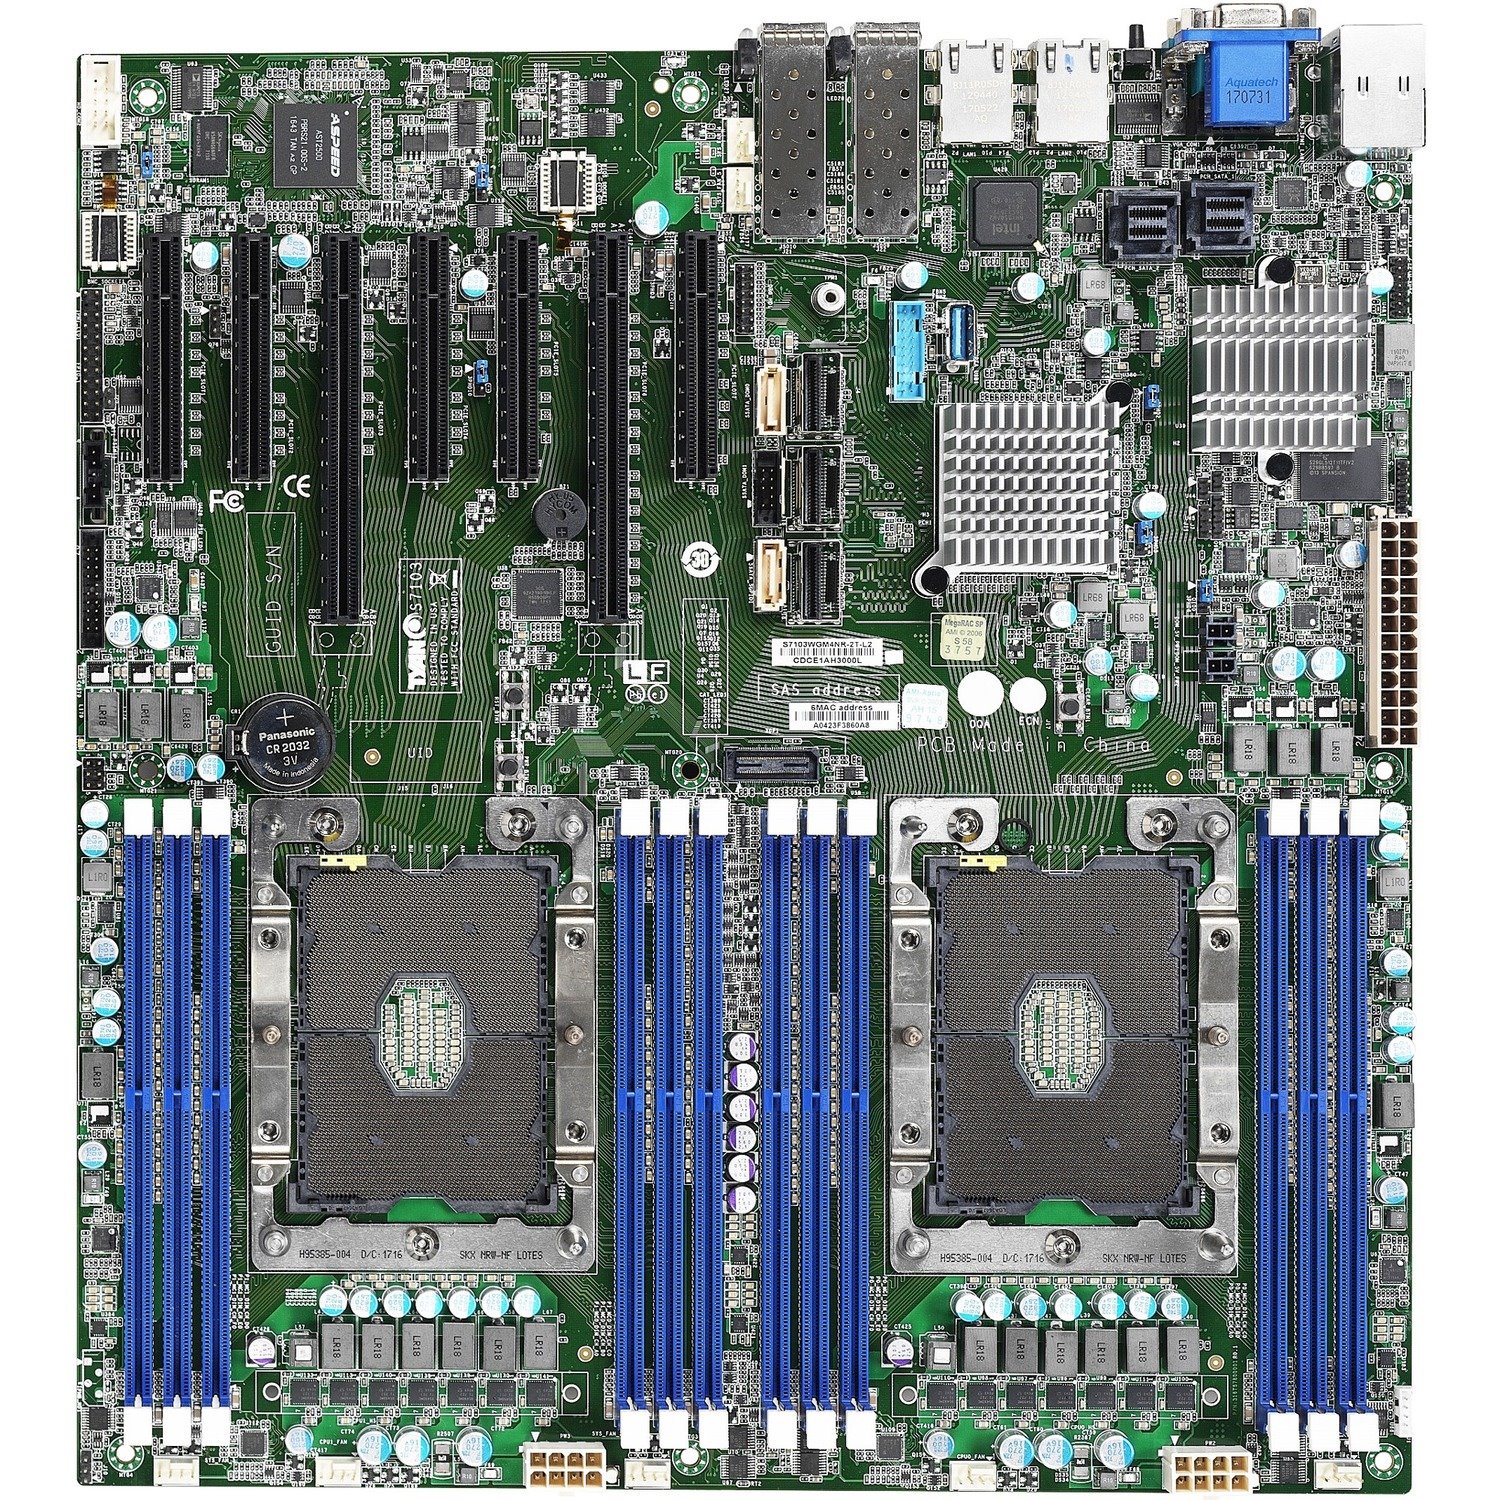 Tyan Tempest CX S7103 Server Motherboard - Intel C622 Chipset - Socket P LGA-3647 - Extended ATX